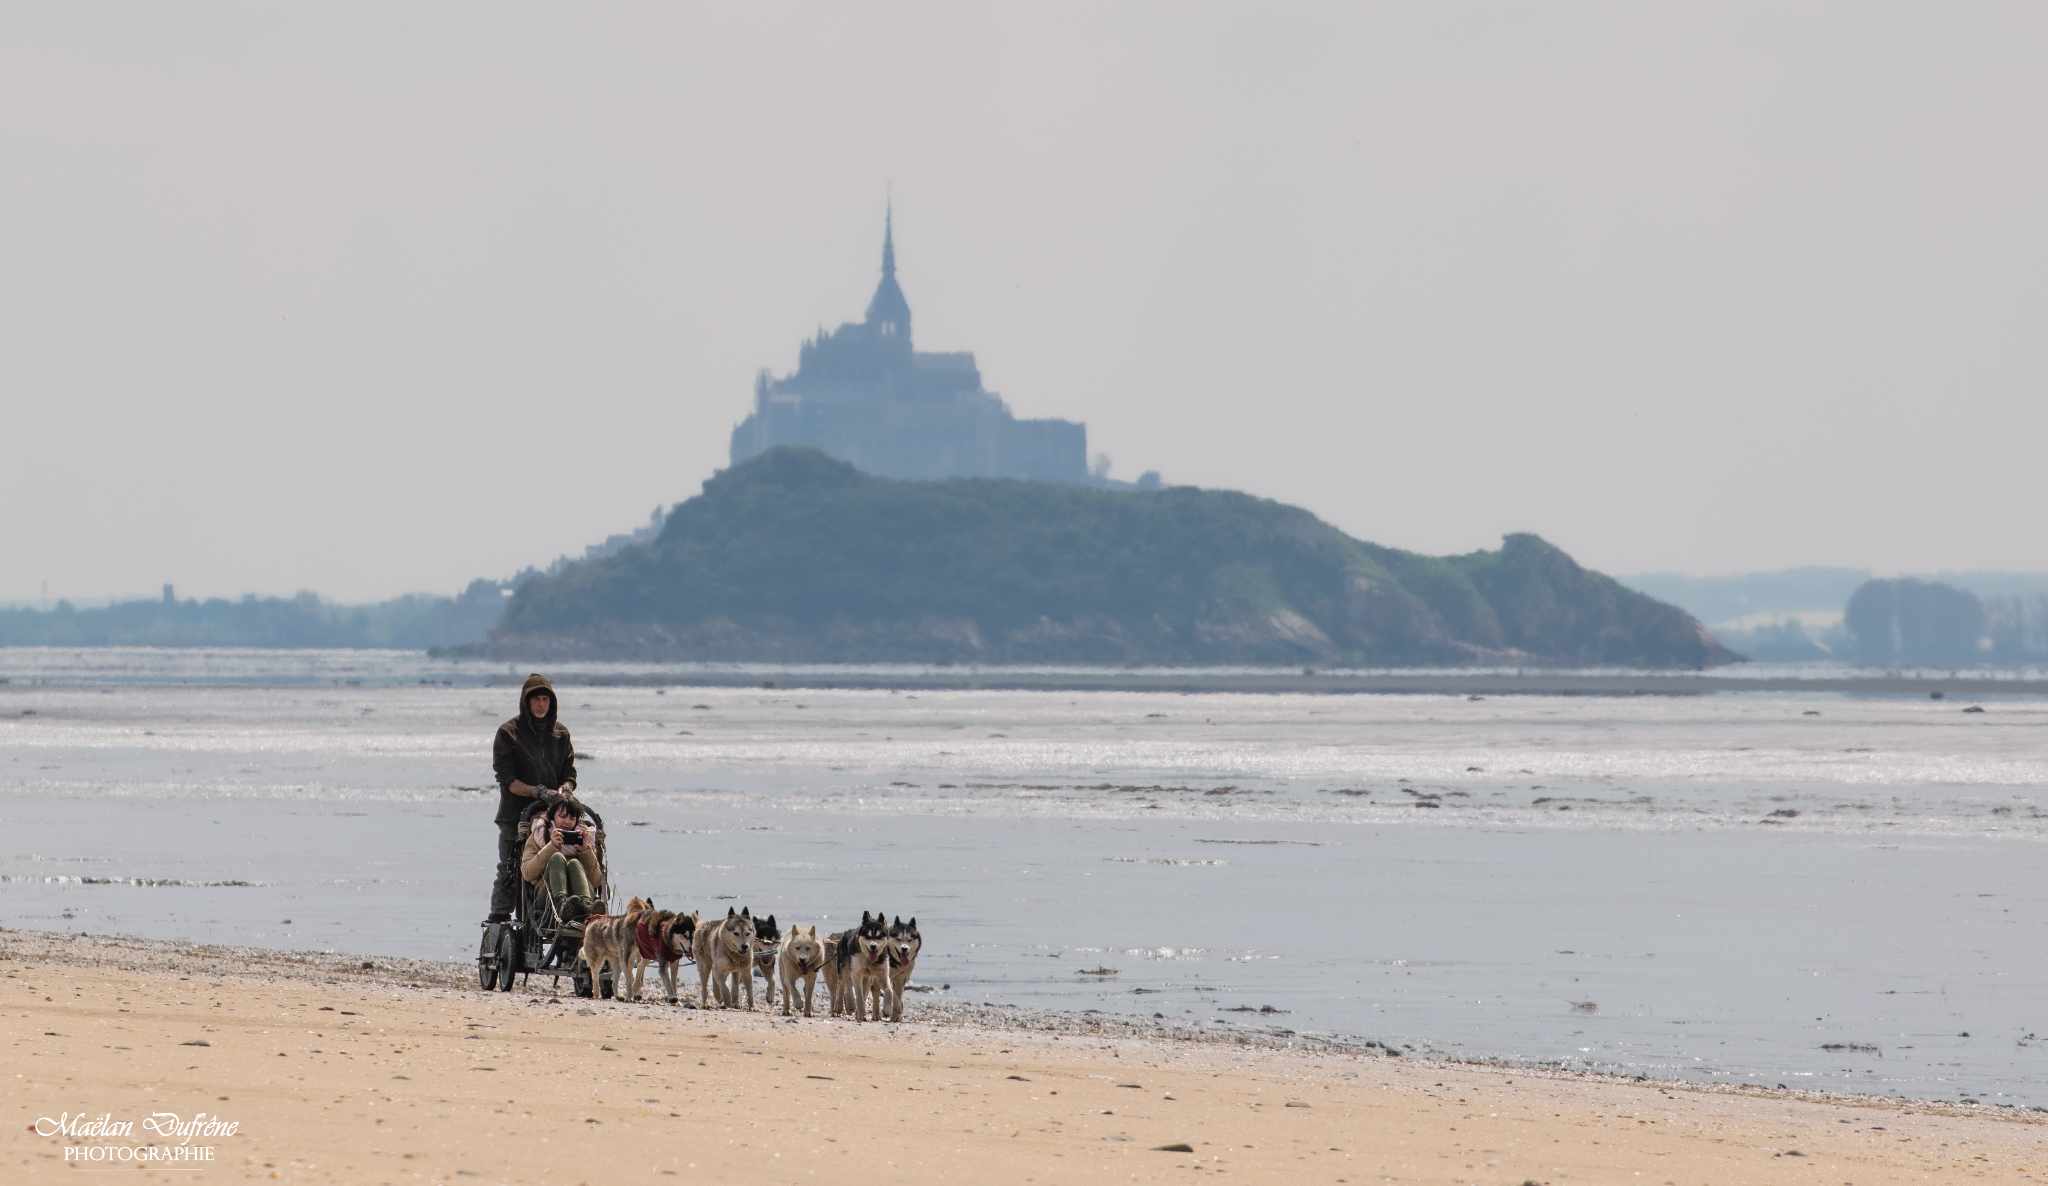 Sled dogs in the bay of Mont Saint-Michel